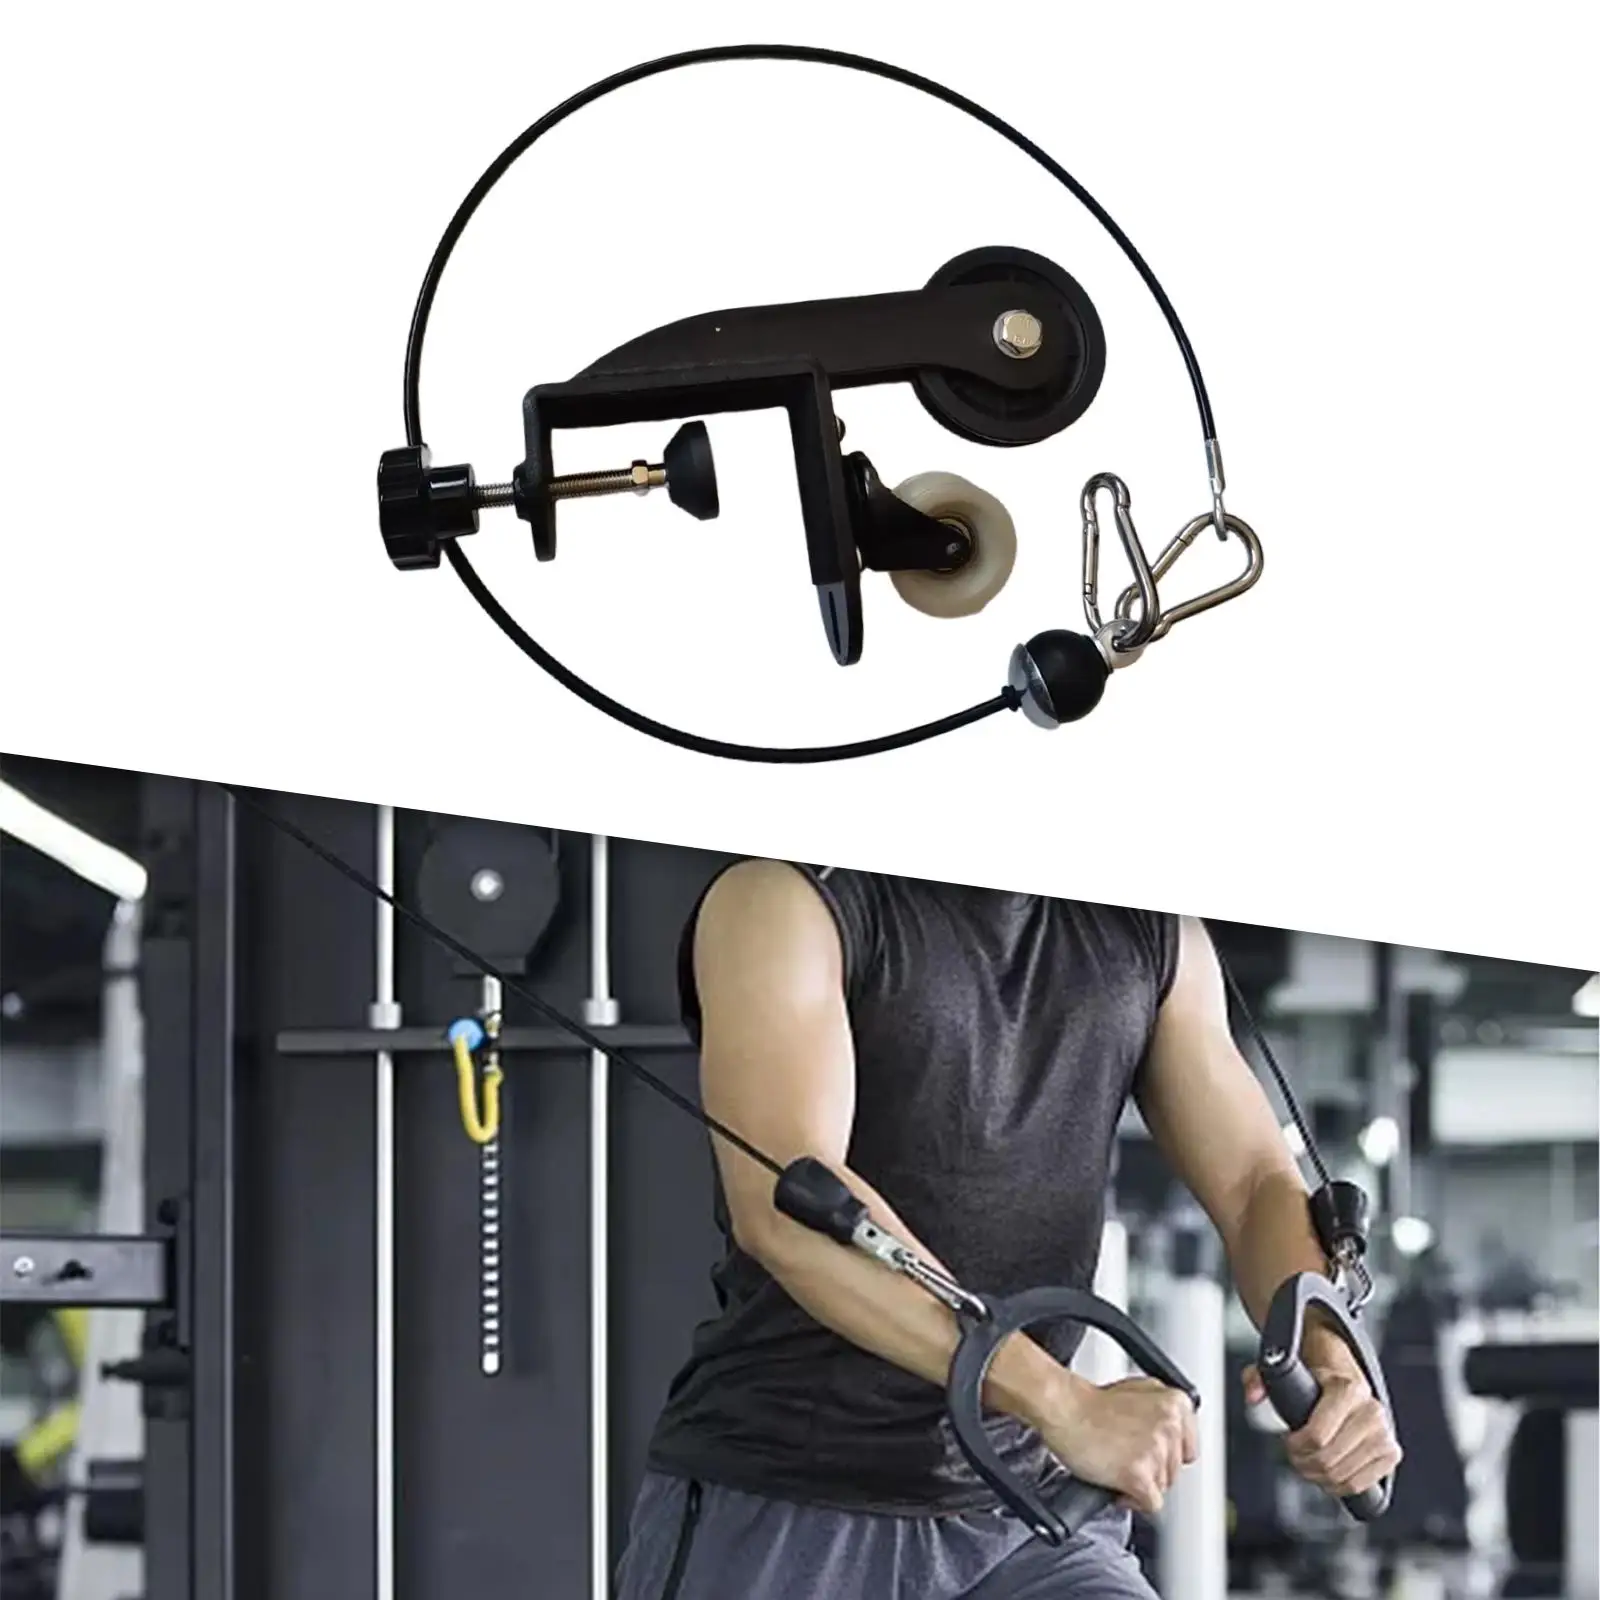 

Wrist Exerciser Exercise Home Gym Fitness Forearm Workout for Arm Wrestling Enthusiasts Adults Indoor Lifting Trainers Hand